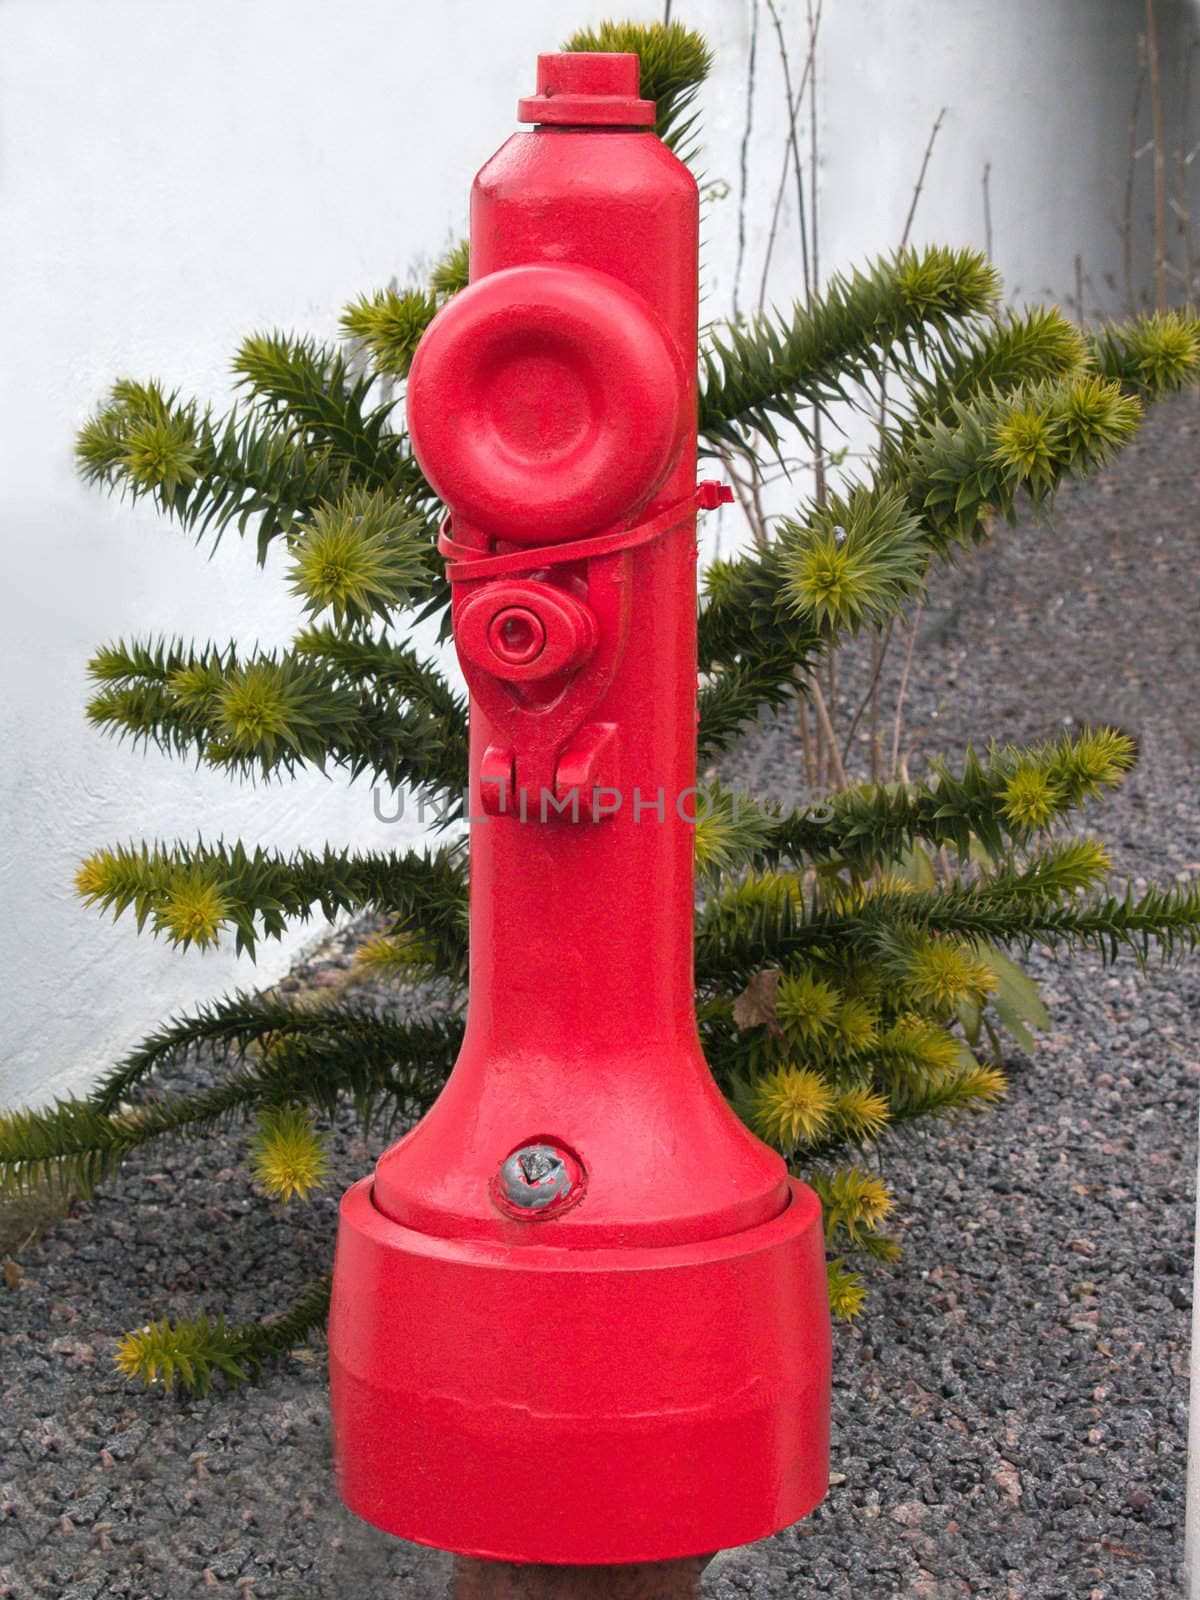 Fire fighting - red fire hydrant